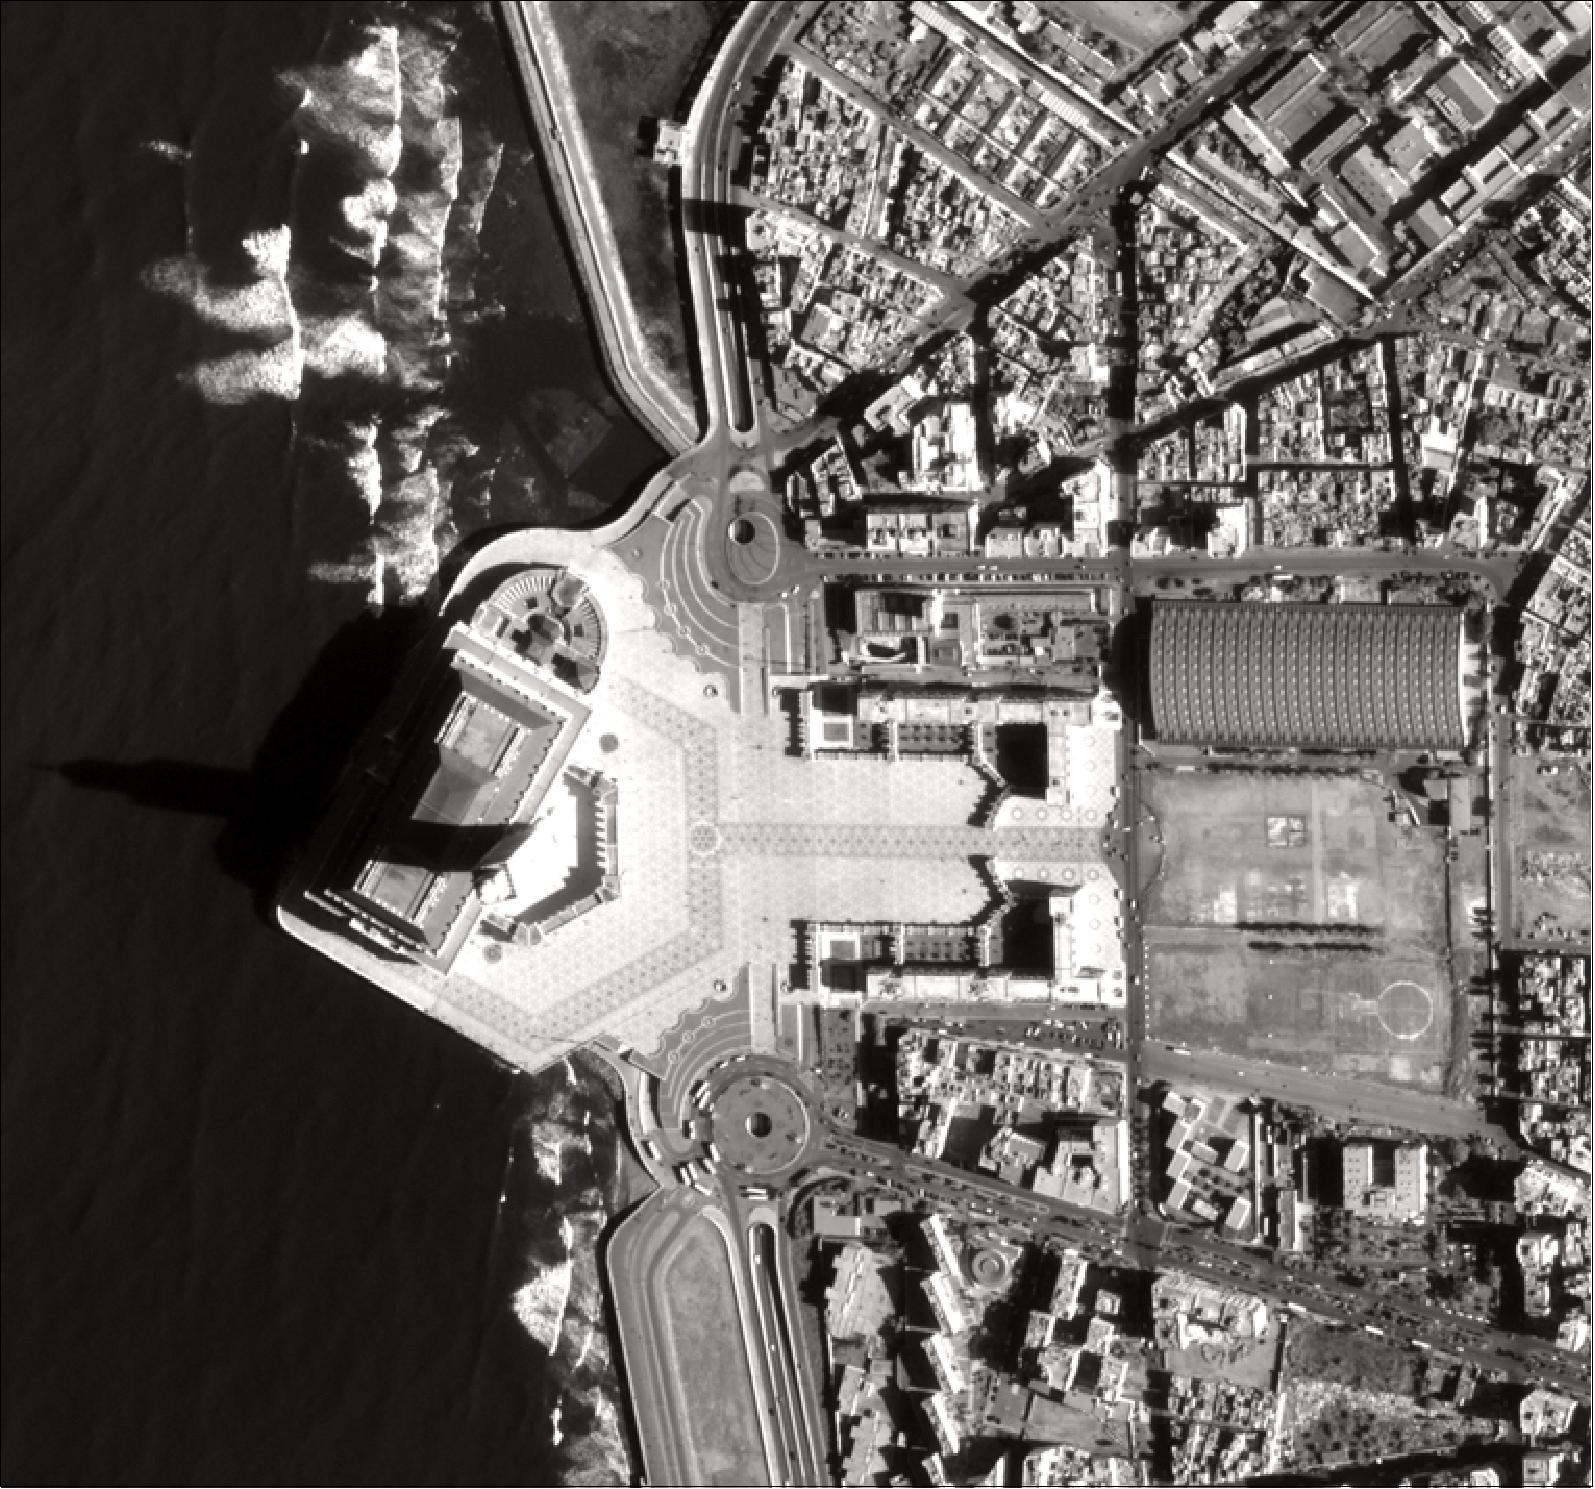 Figure 37: Three days after its launch, Pleiades-1A returned this image of the Hassan II Mosque in Casablanca, Morocco (image credit: CNES, Astrium, Ref. 71)